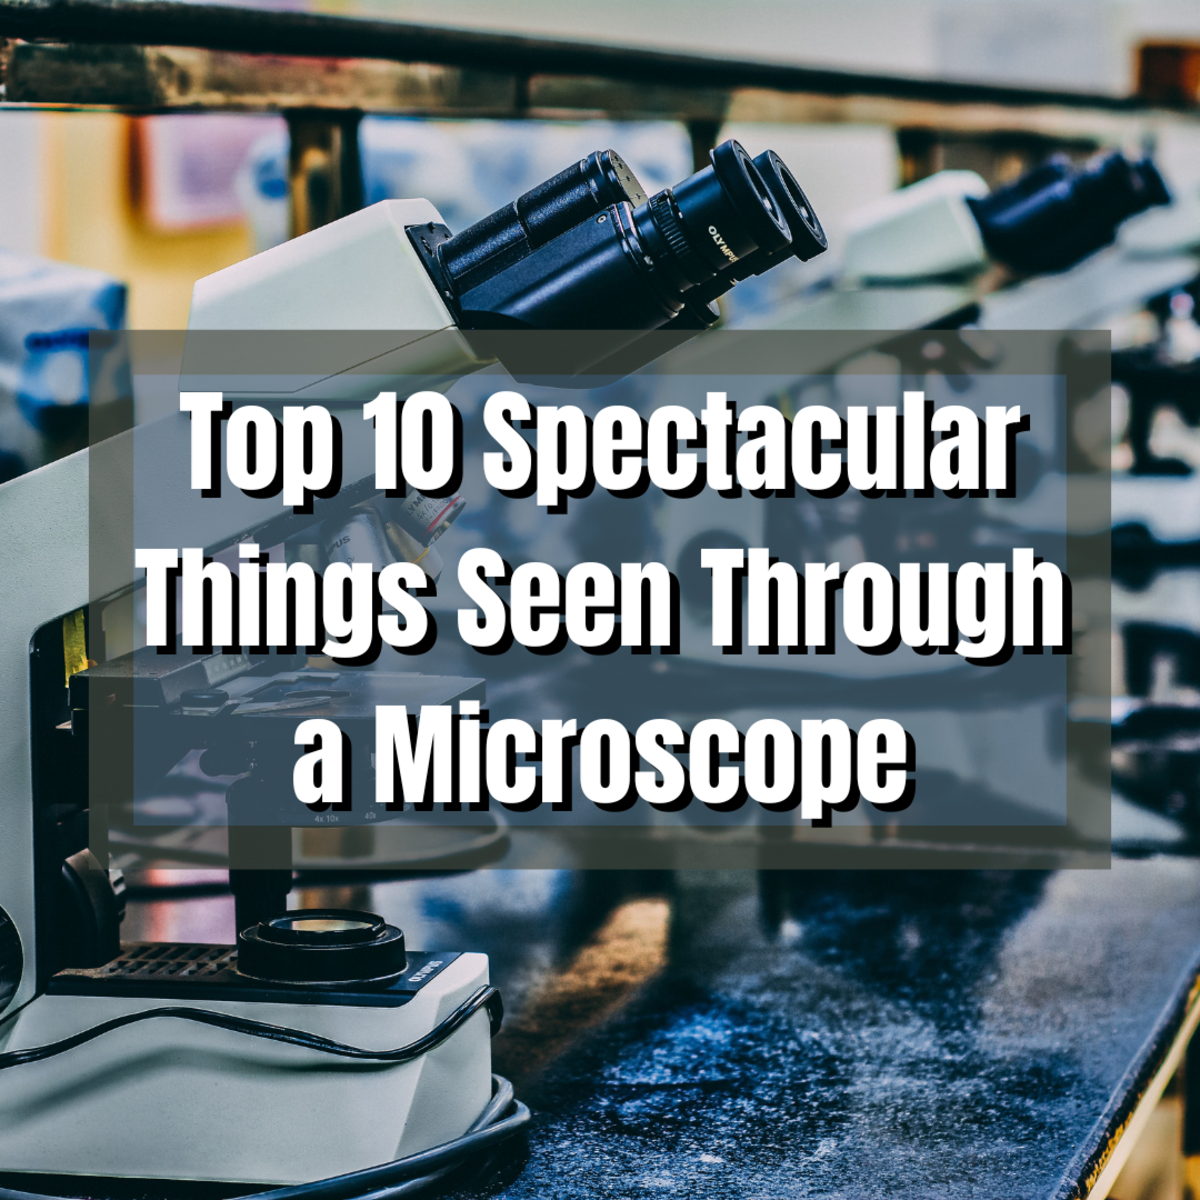 Read on to discover 10 of the most amazing things seen under a microscope, including orange juice and vinyl records!